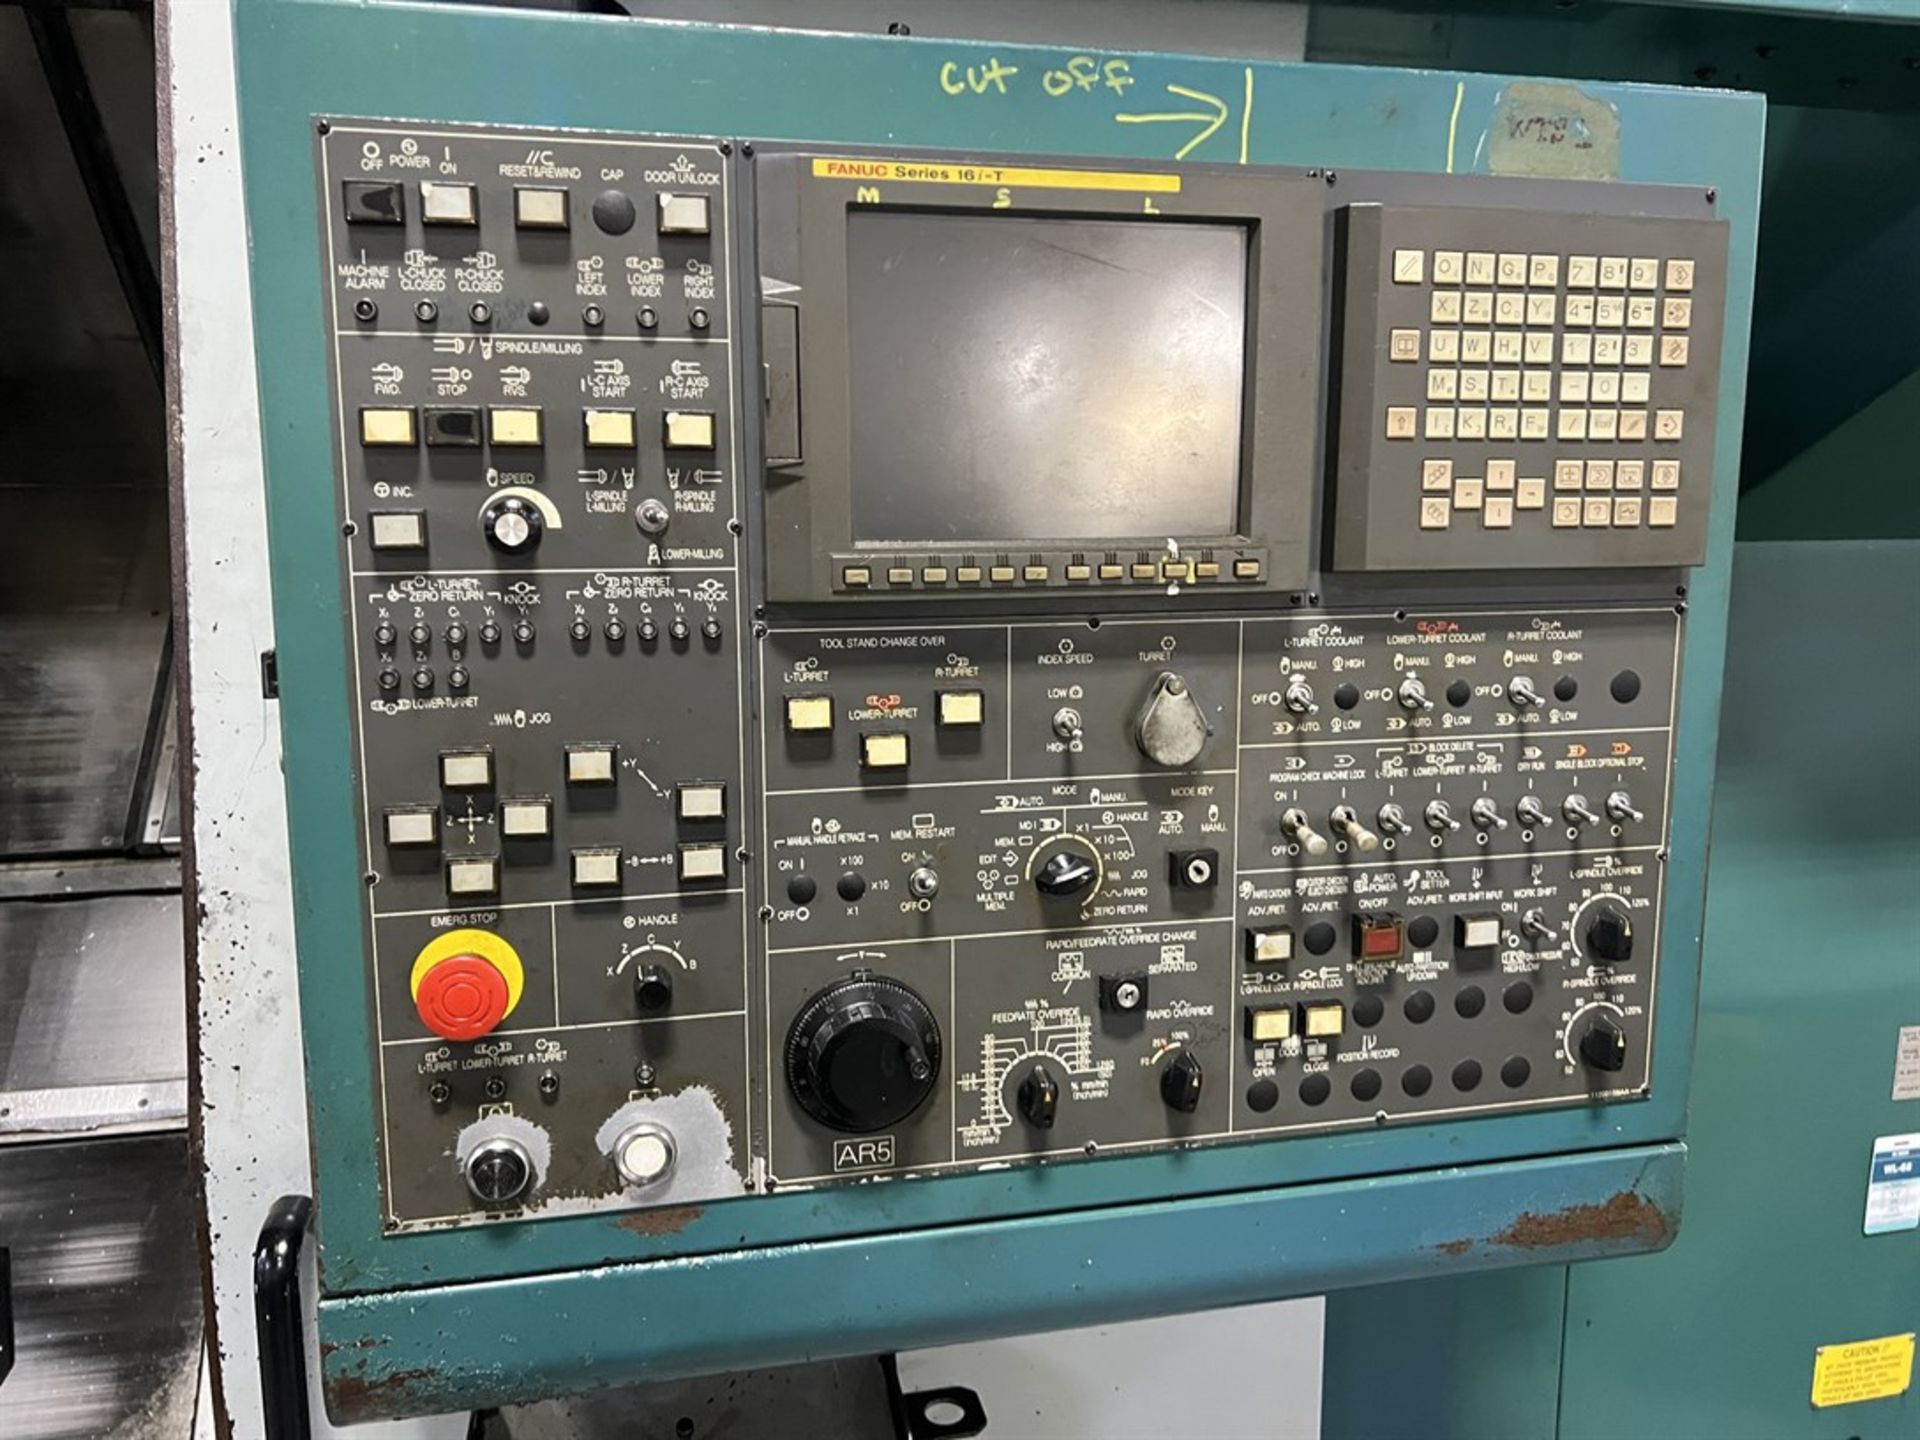 NAKAMURA-TOME WTS-150 CNC Turning Center, s/n V150601, Fanuc 16i-T Control, 12.20" Max Turning - Image 10 of 13